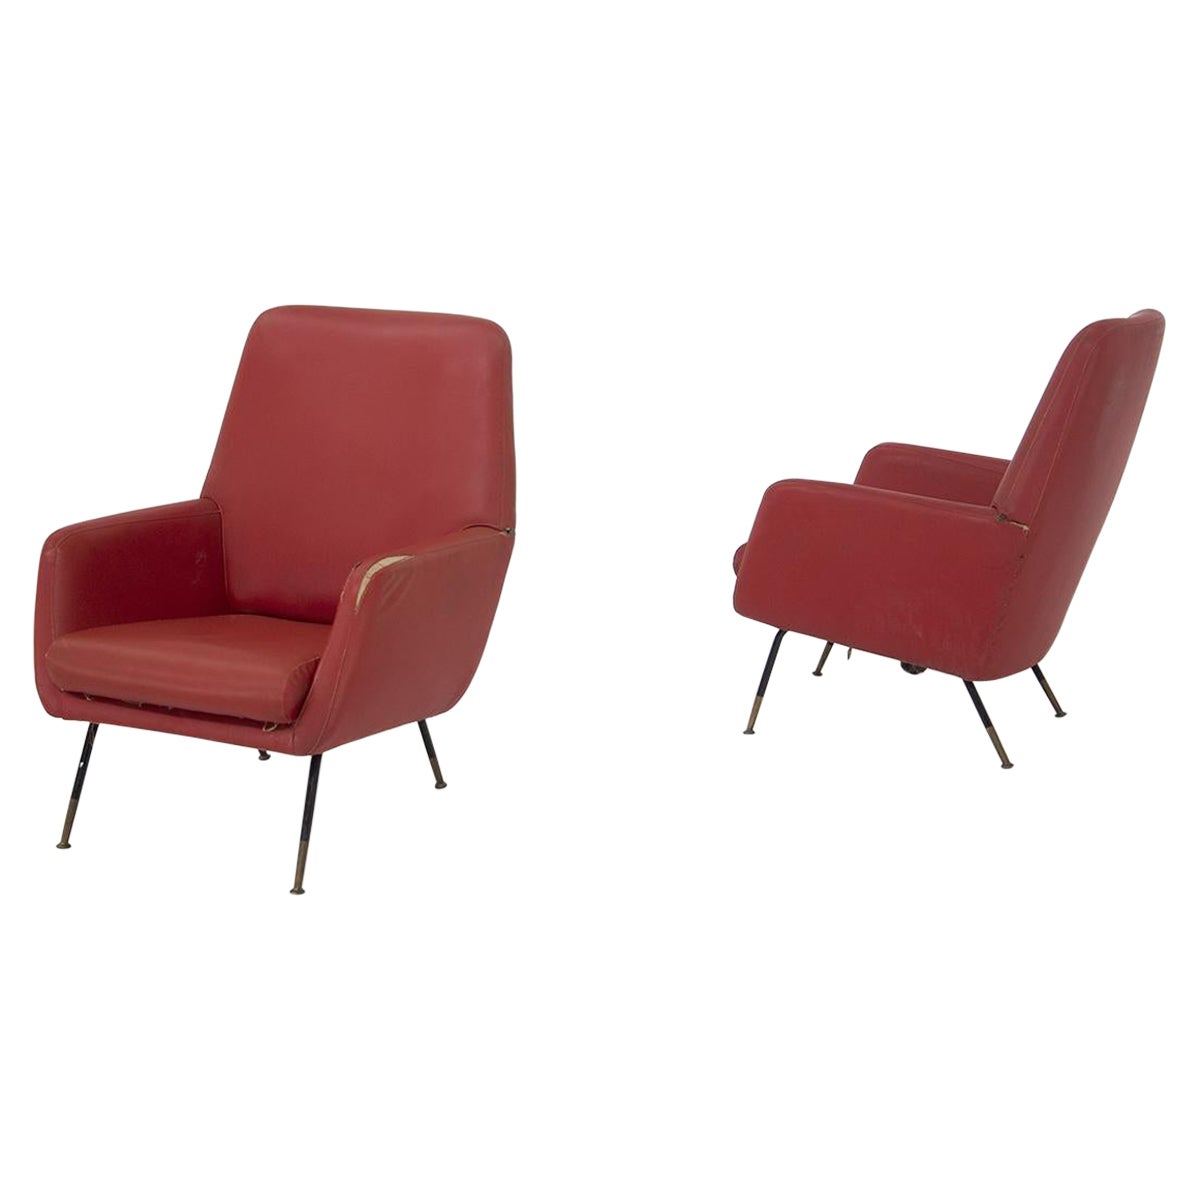 Gastone Rinaldi Vintage Red Leather Armchairs with Brass Feet